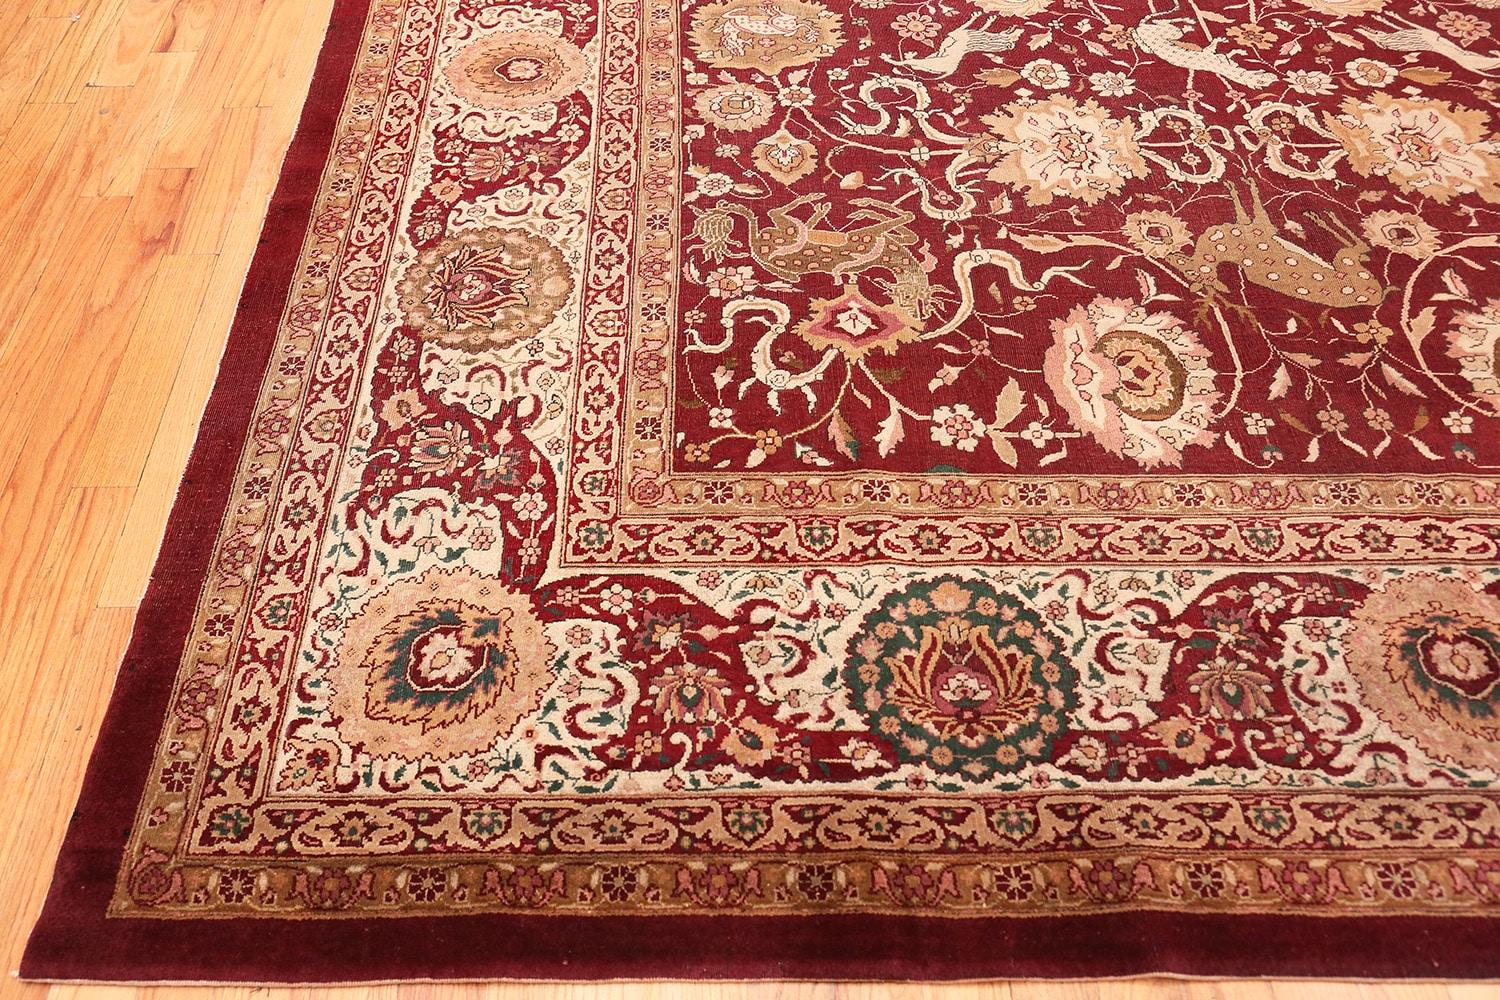 Animal Patterned Room Sized Antique Indian Agra Rug. Size: 10 ft x 13 ft 8 in 3